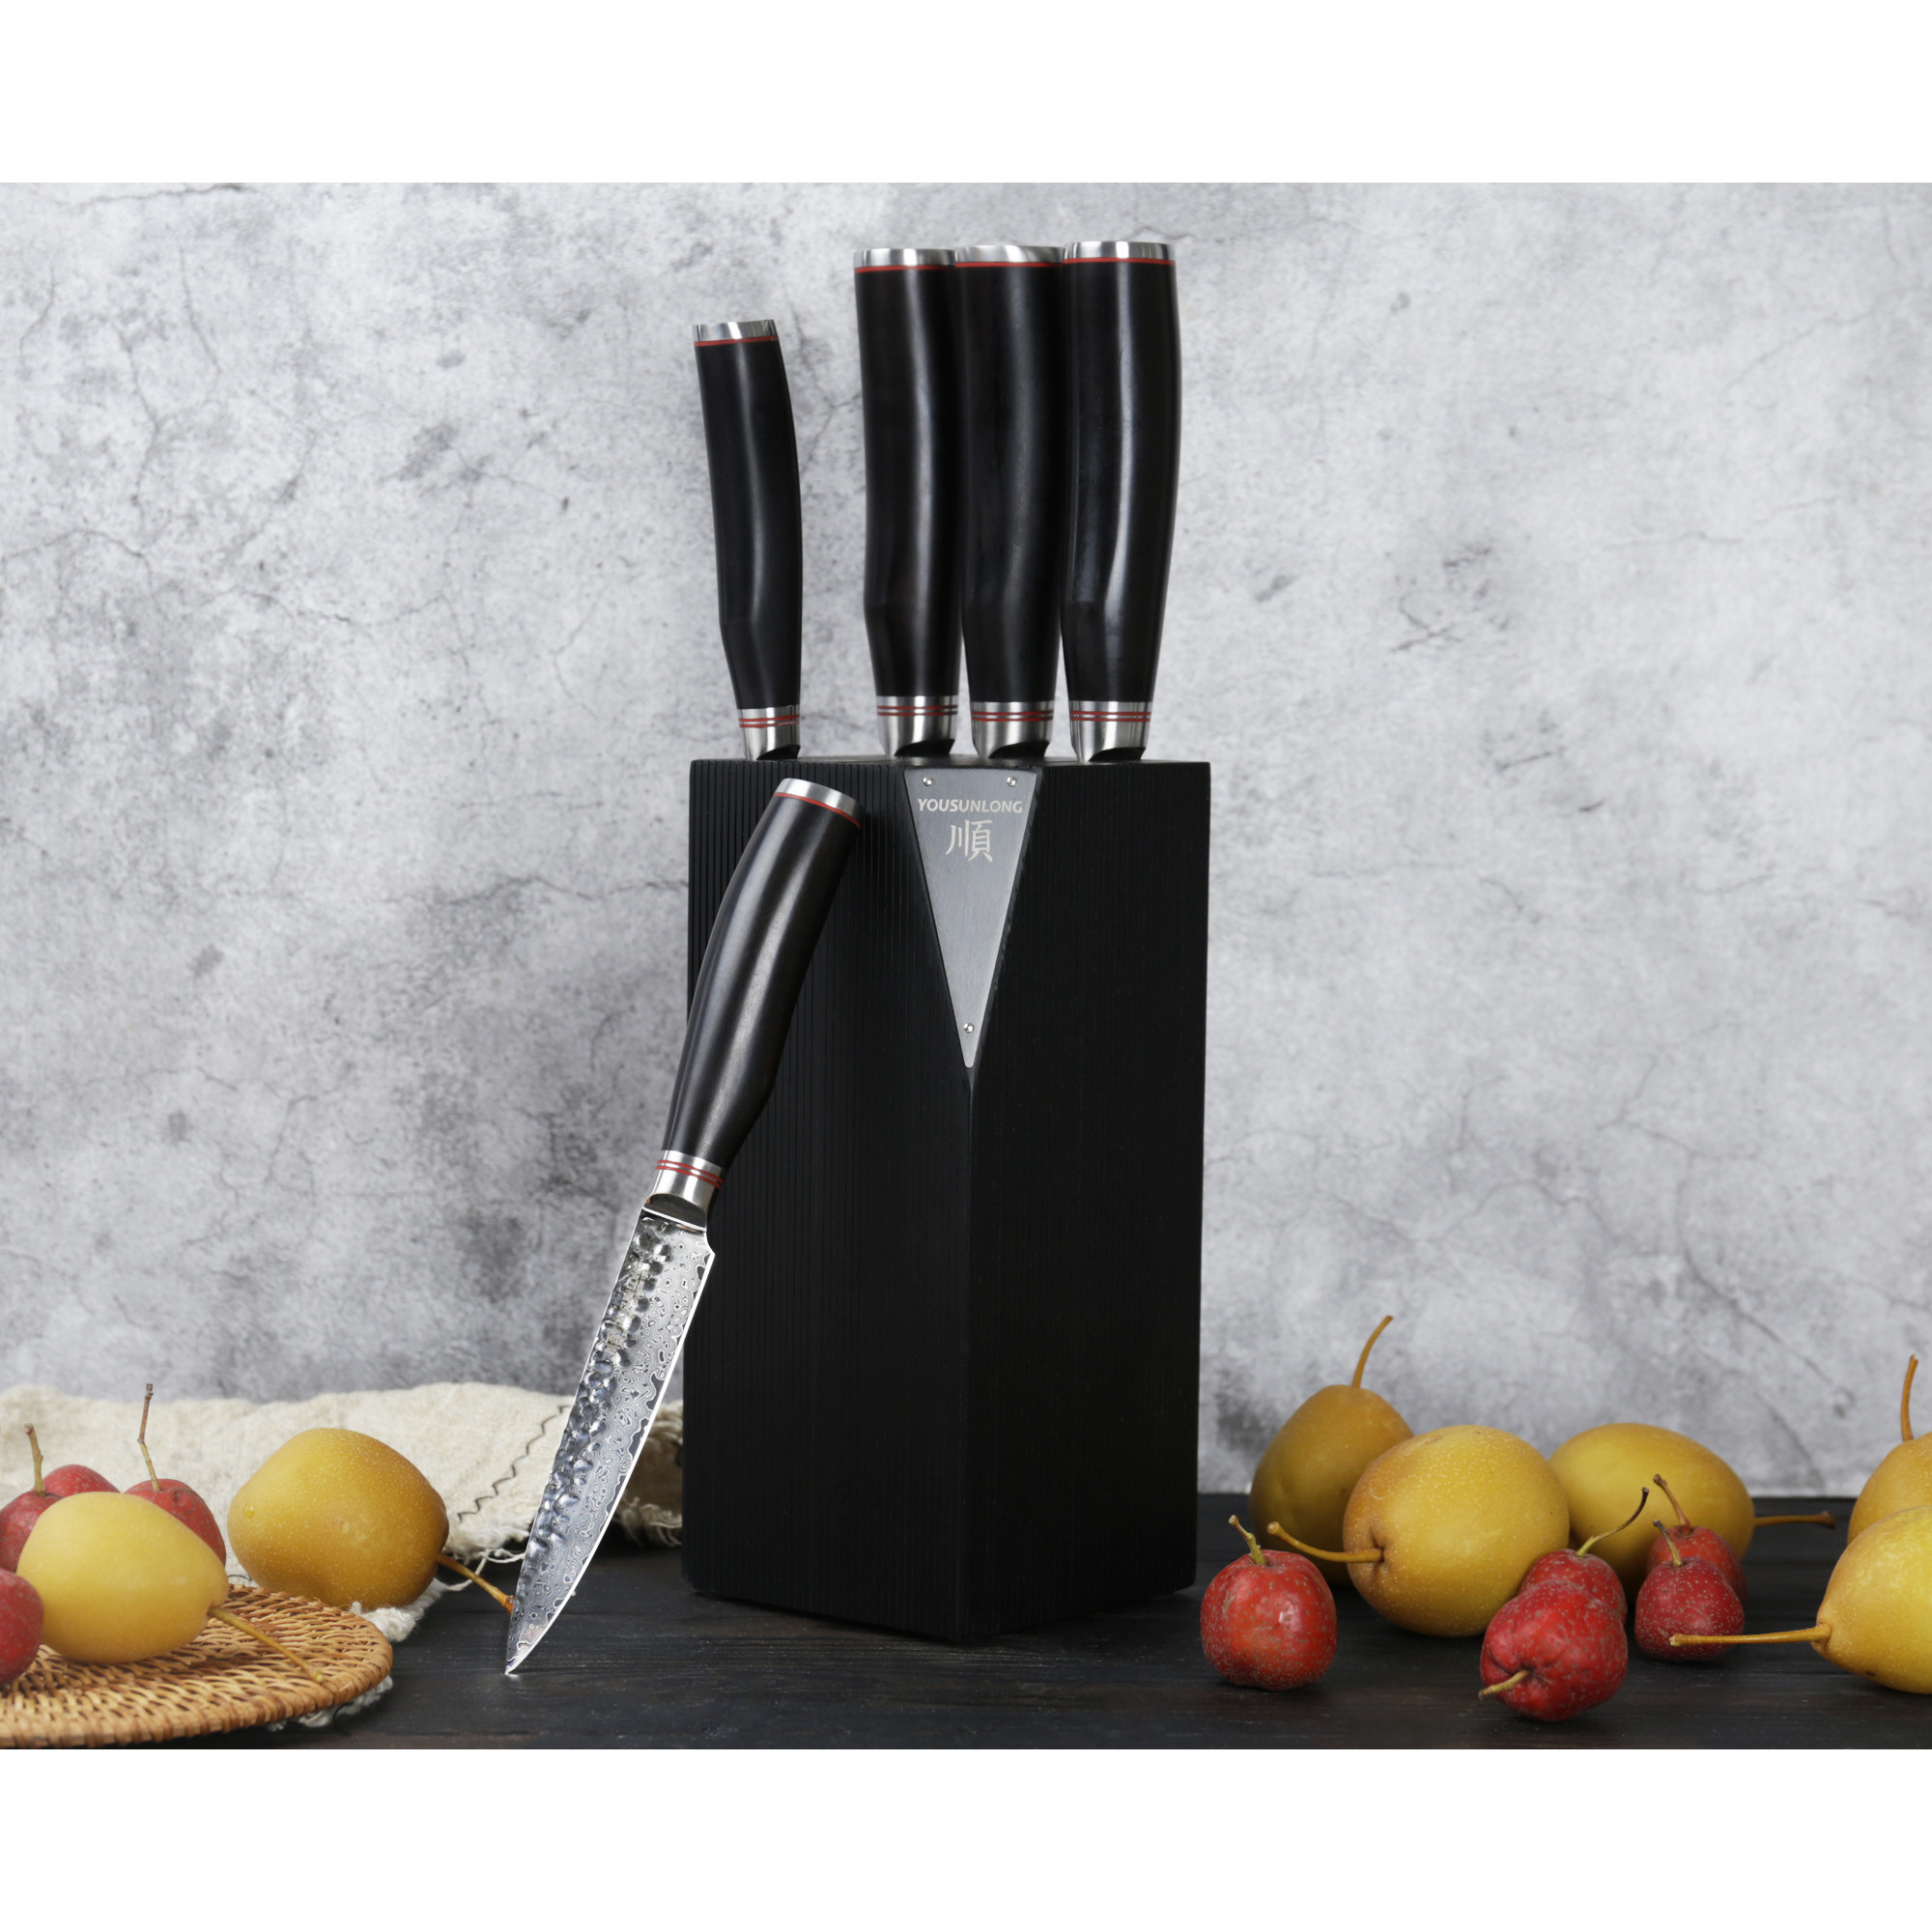 5-Piece Stainless Steel Knife Set with Stand – Youzey Retail